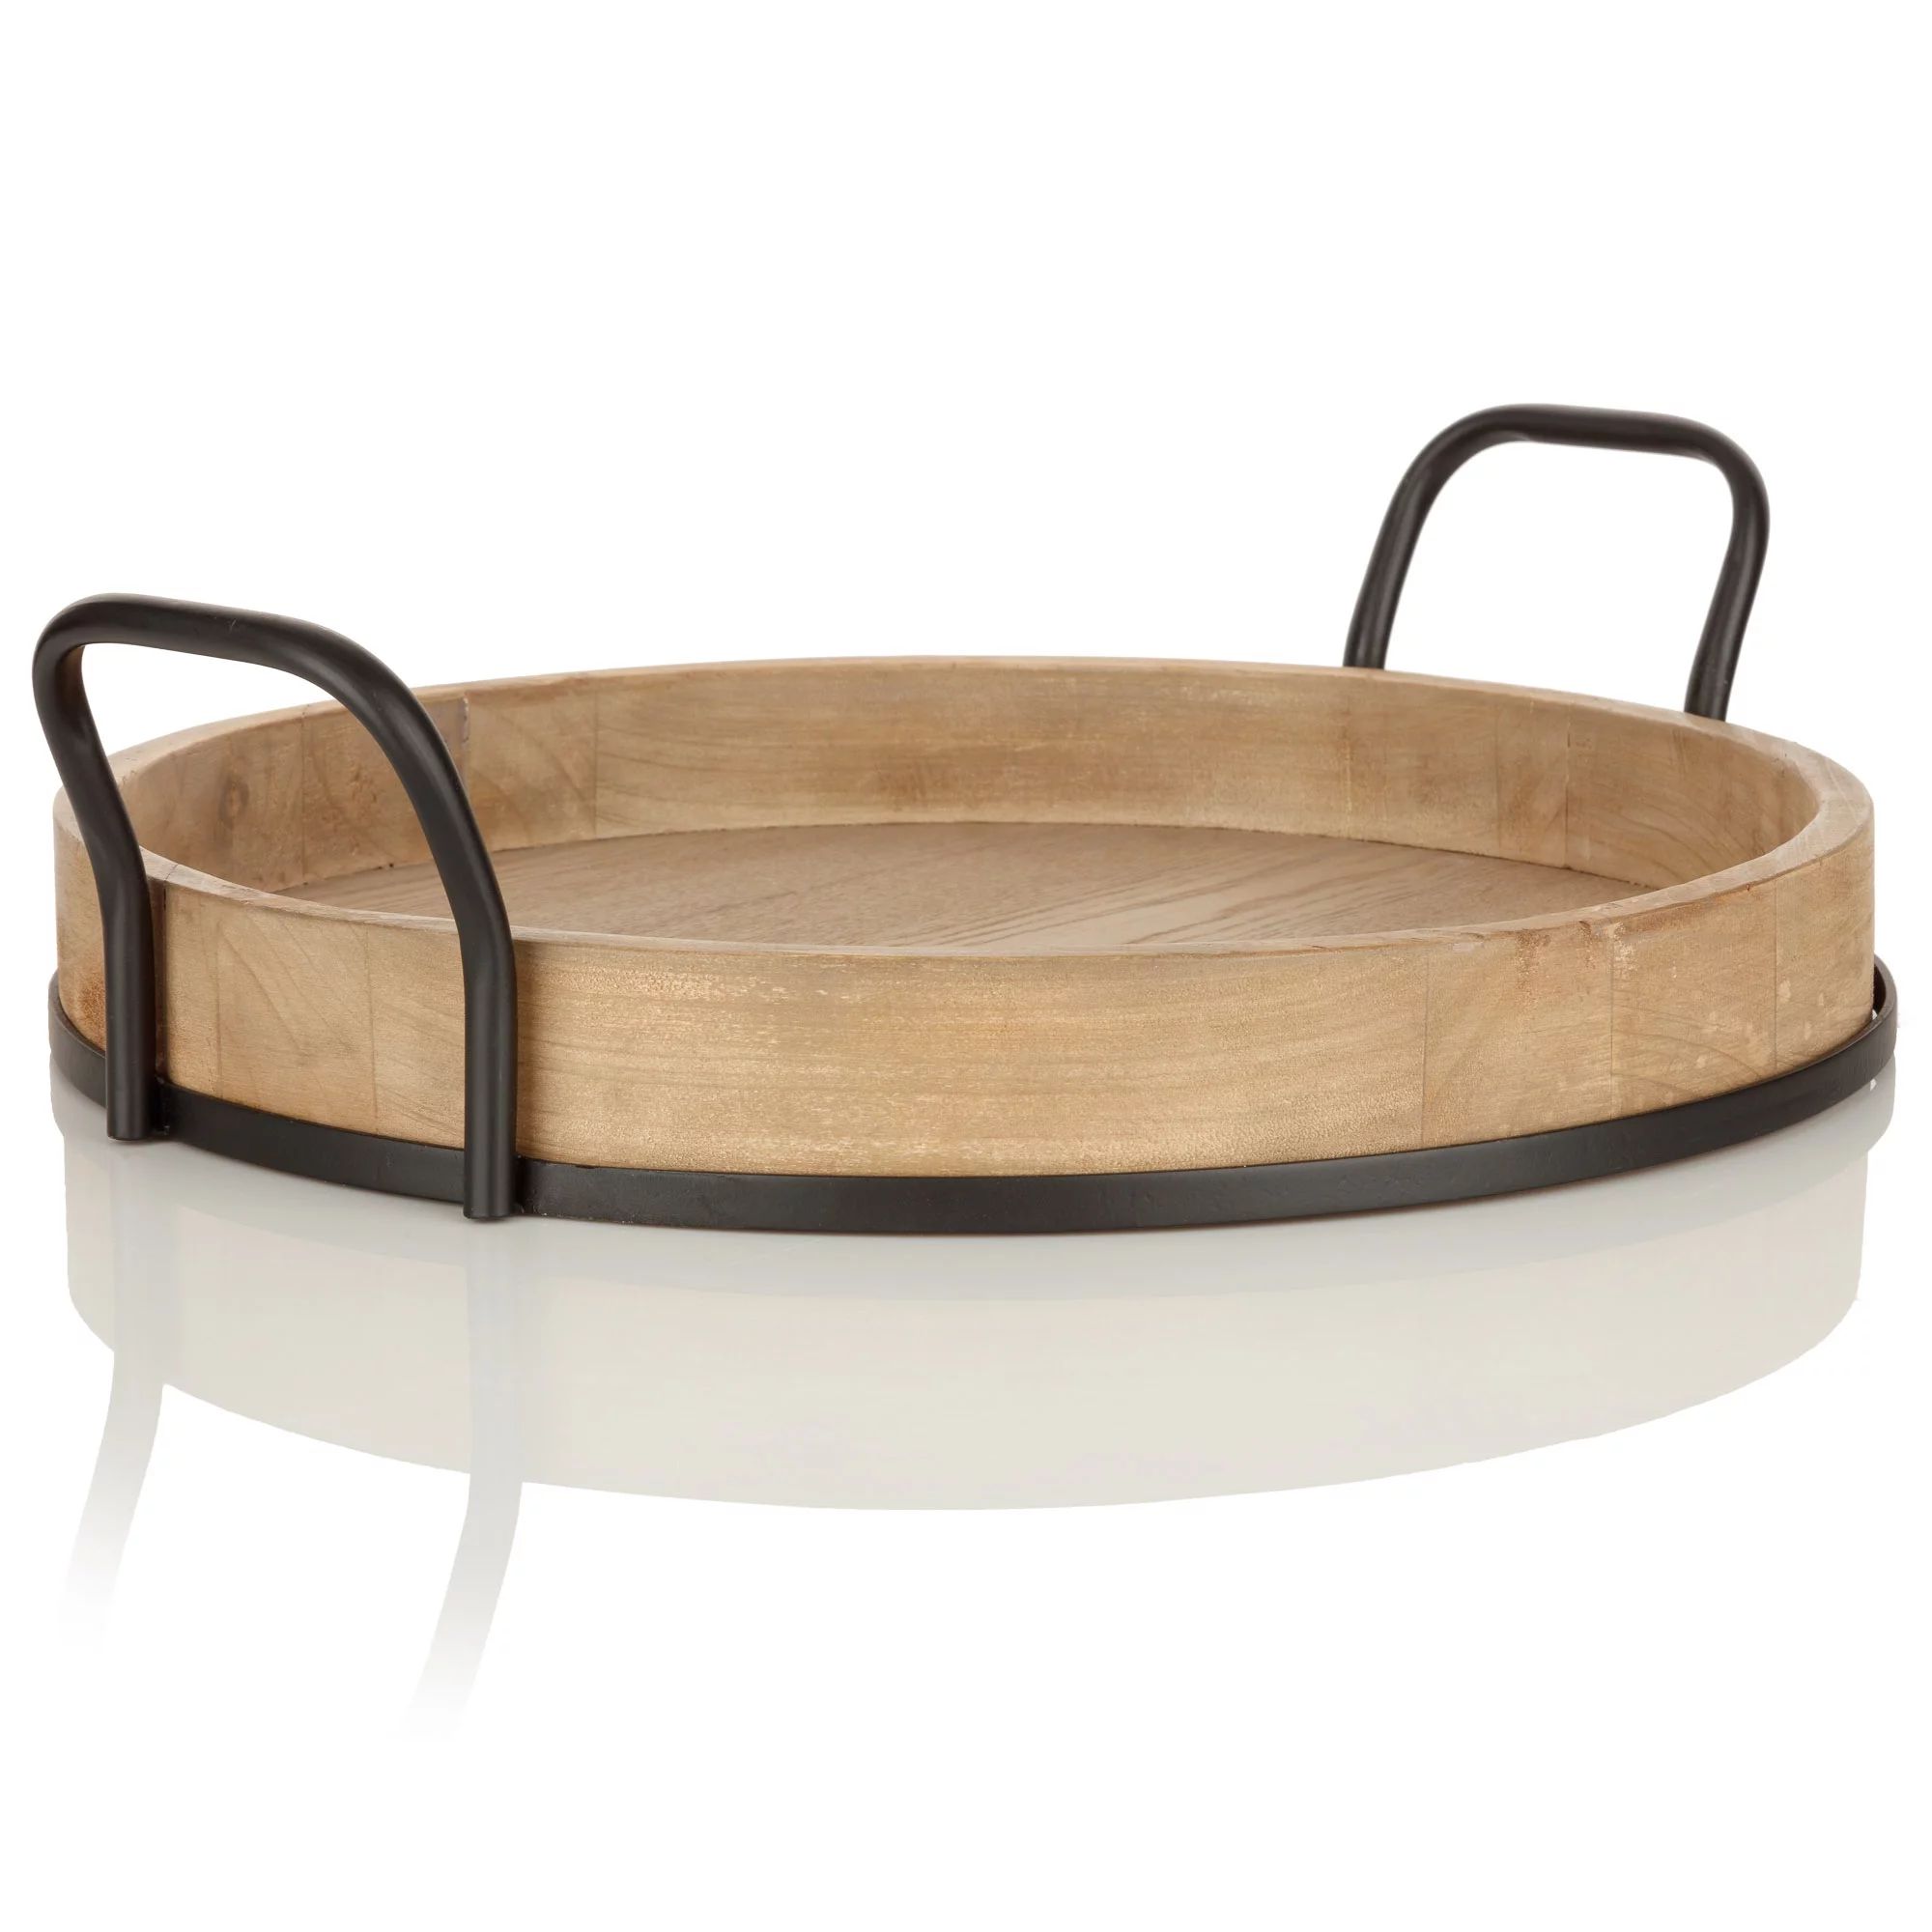 Better Homes & Gardens Round Wood Serving Tray with Handles, 18.5" x 17" | Walmart (US)